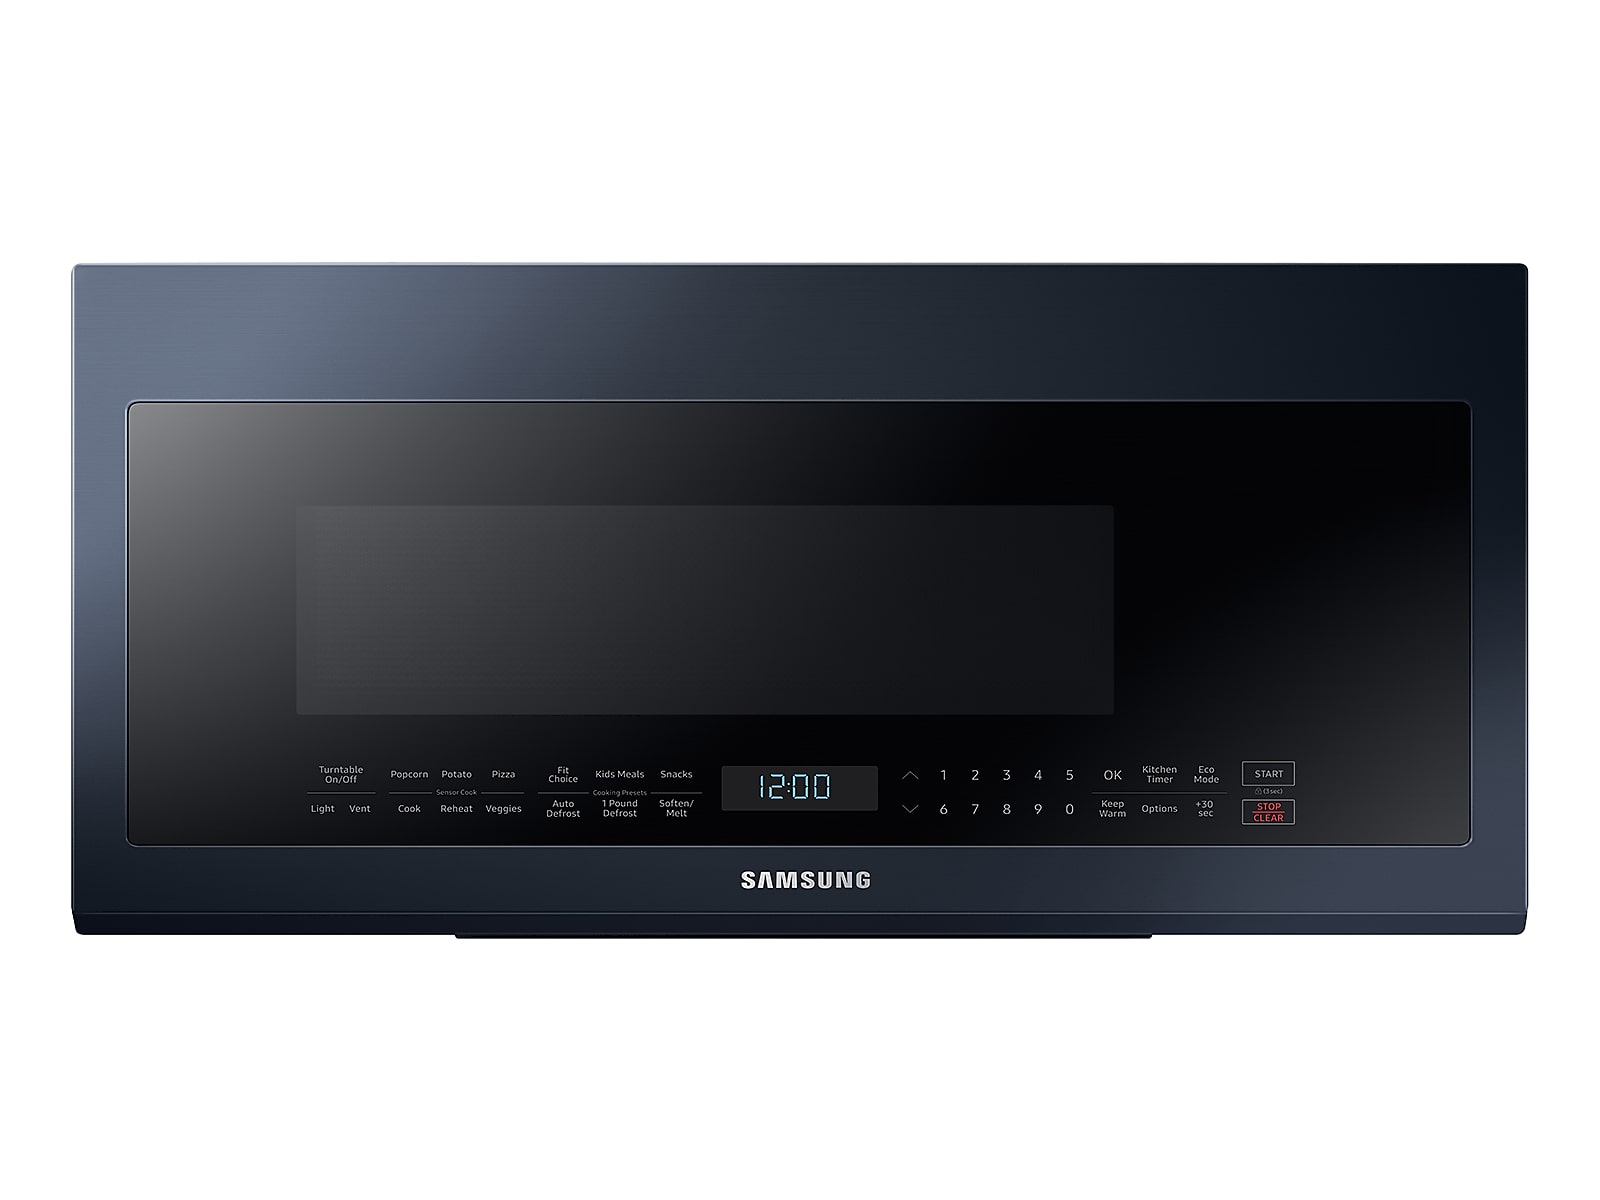 Samsung Bespoke Over-the-Range Microwave 2.1 cu. ft. with Sensor Cooking in Navy Blue Steel(ME21A706BQN/AA)